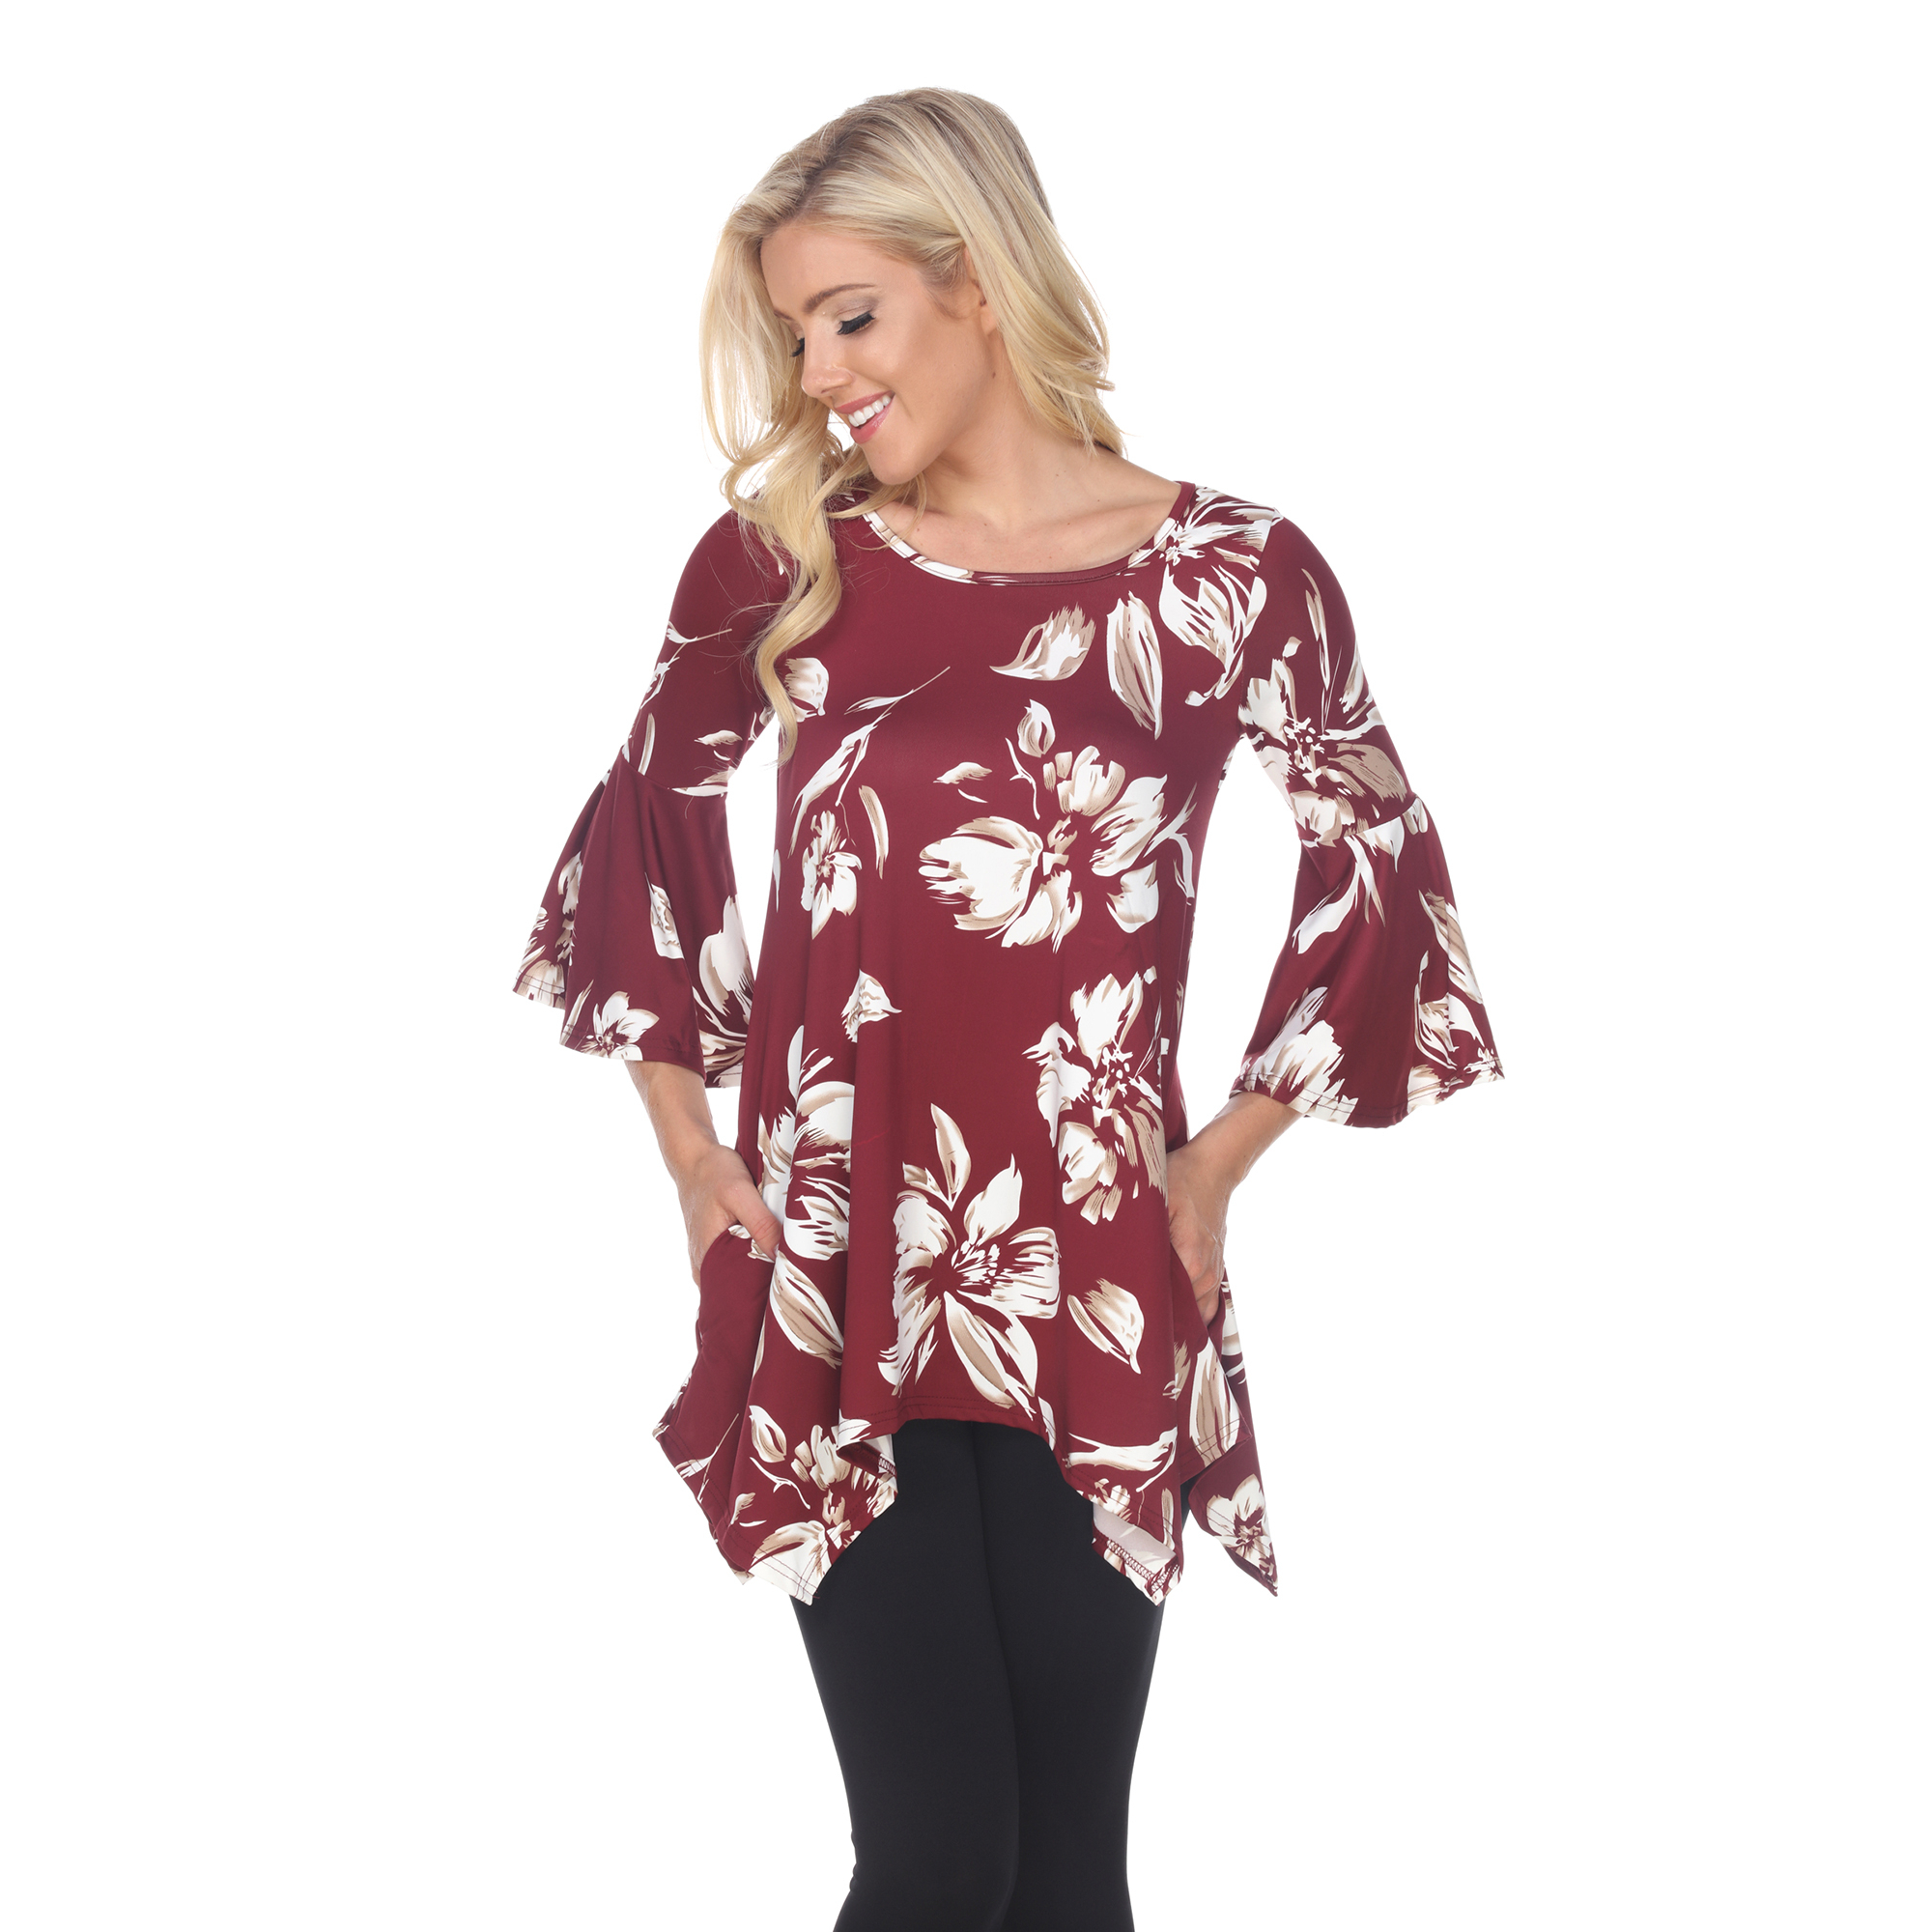 White Mark Women's Floral Print Quarter Sleeve Tunic Top With Pockets - Red, Medium